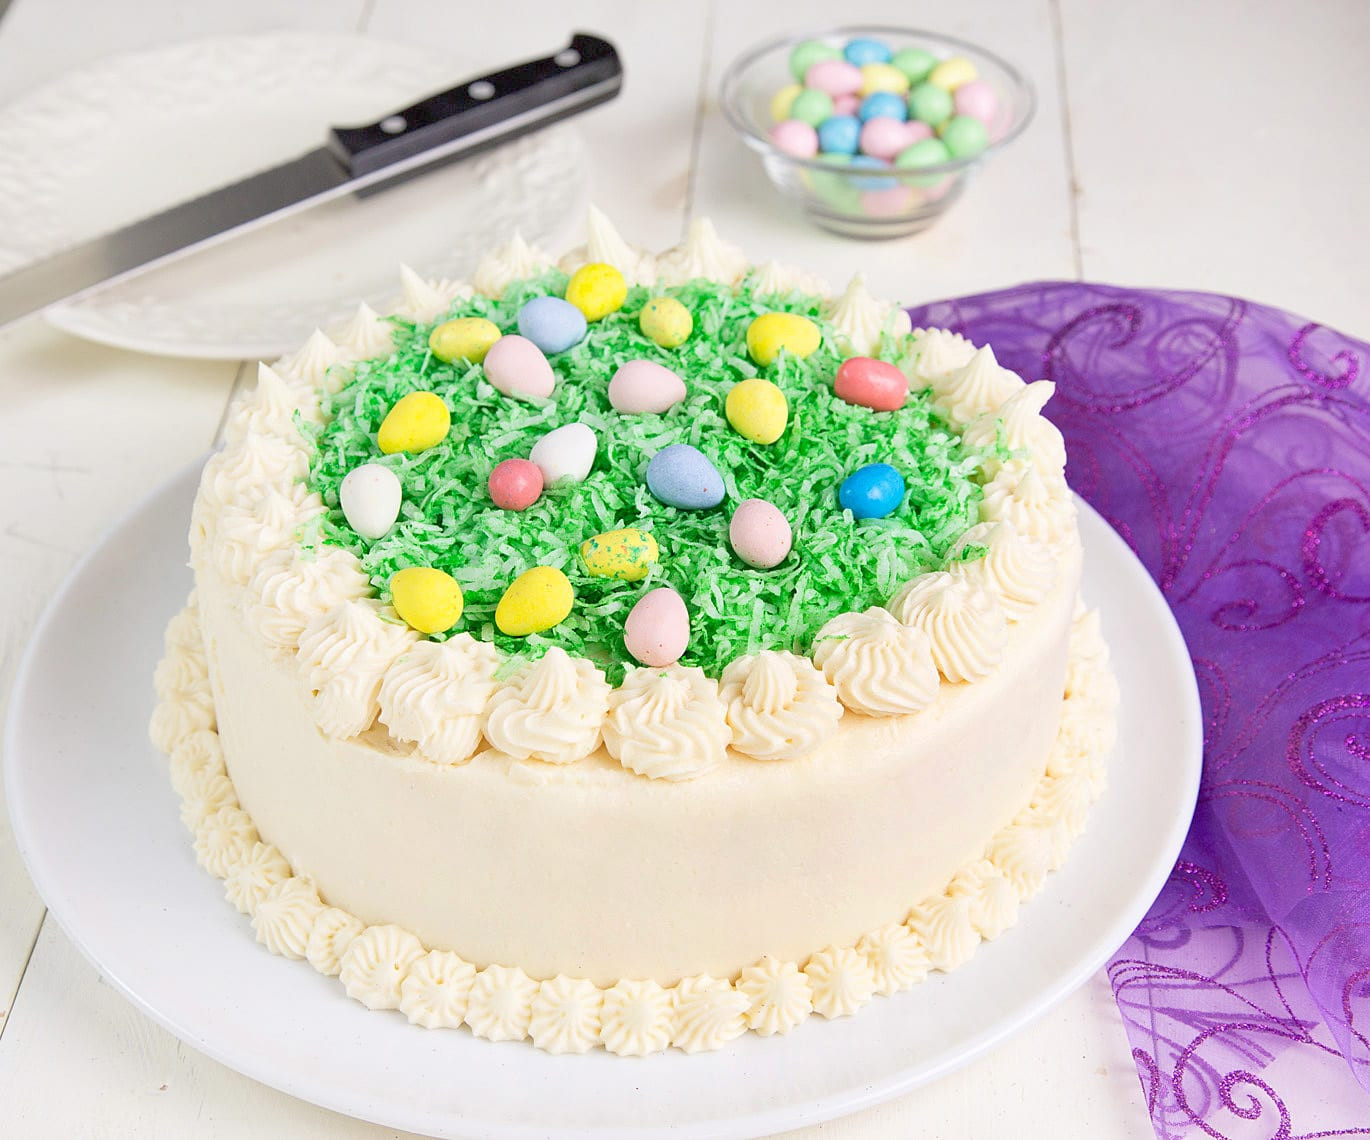 Easter Coconut Cake
 My Coconut Easter Cake Recipe Tips and Tricks Chef Dennis